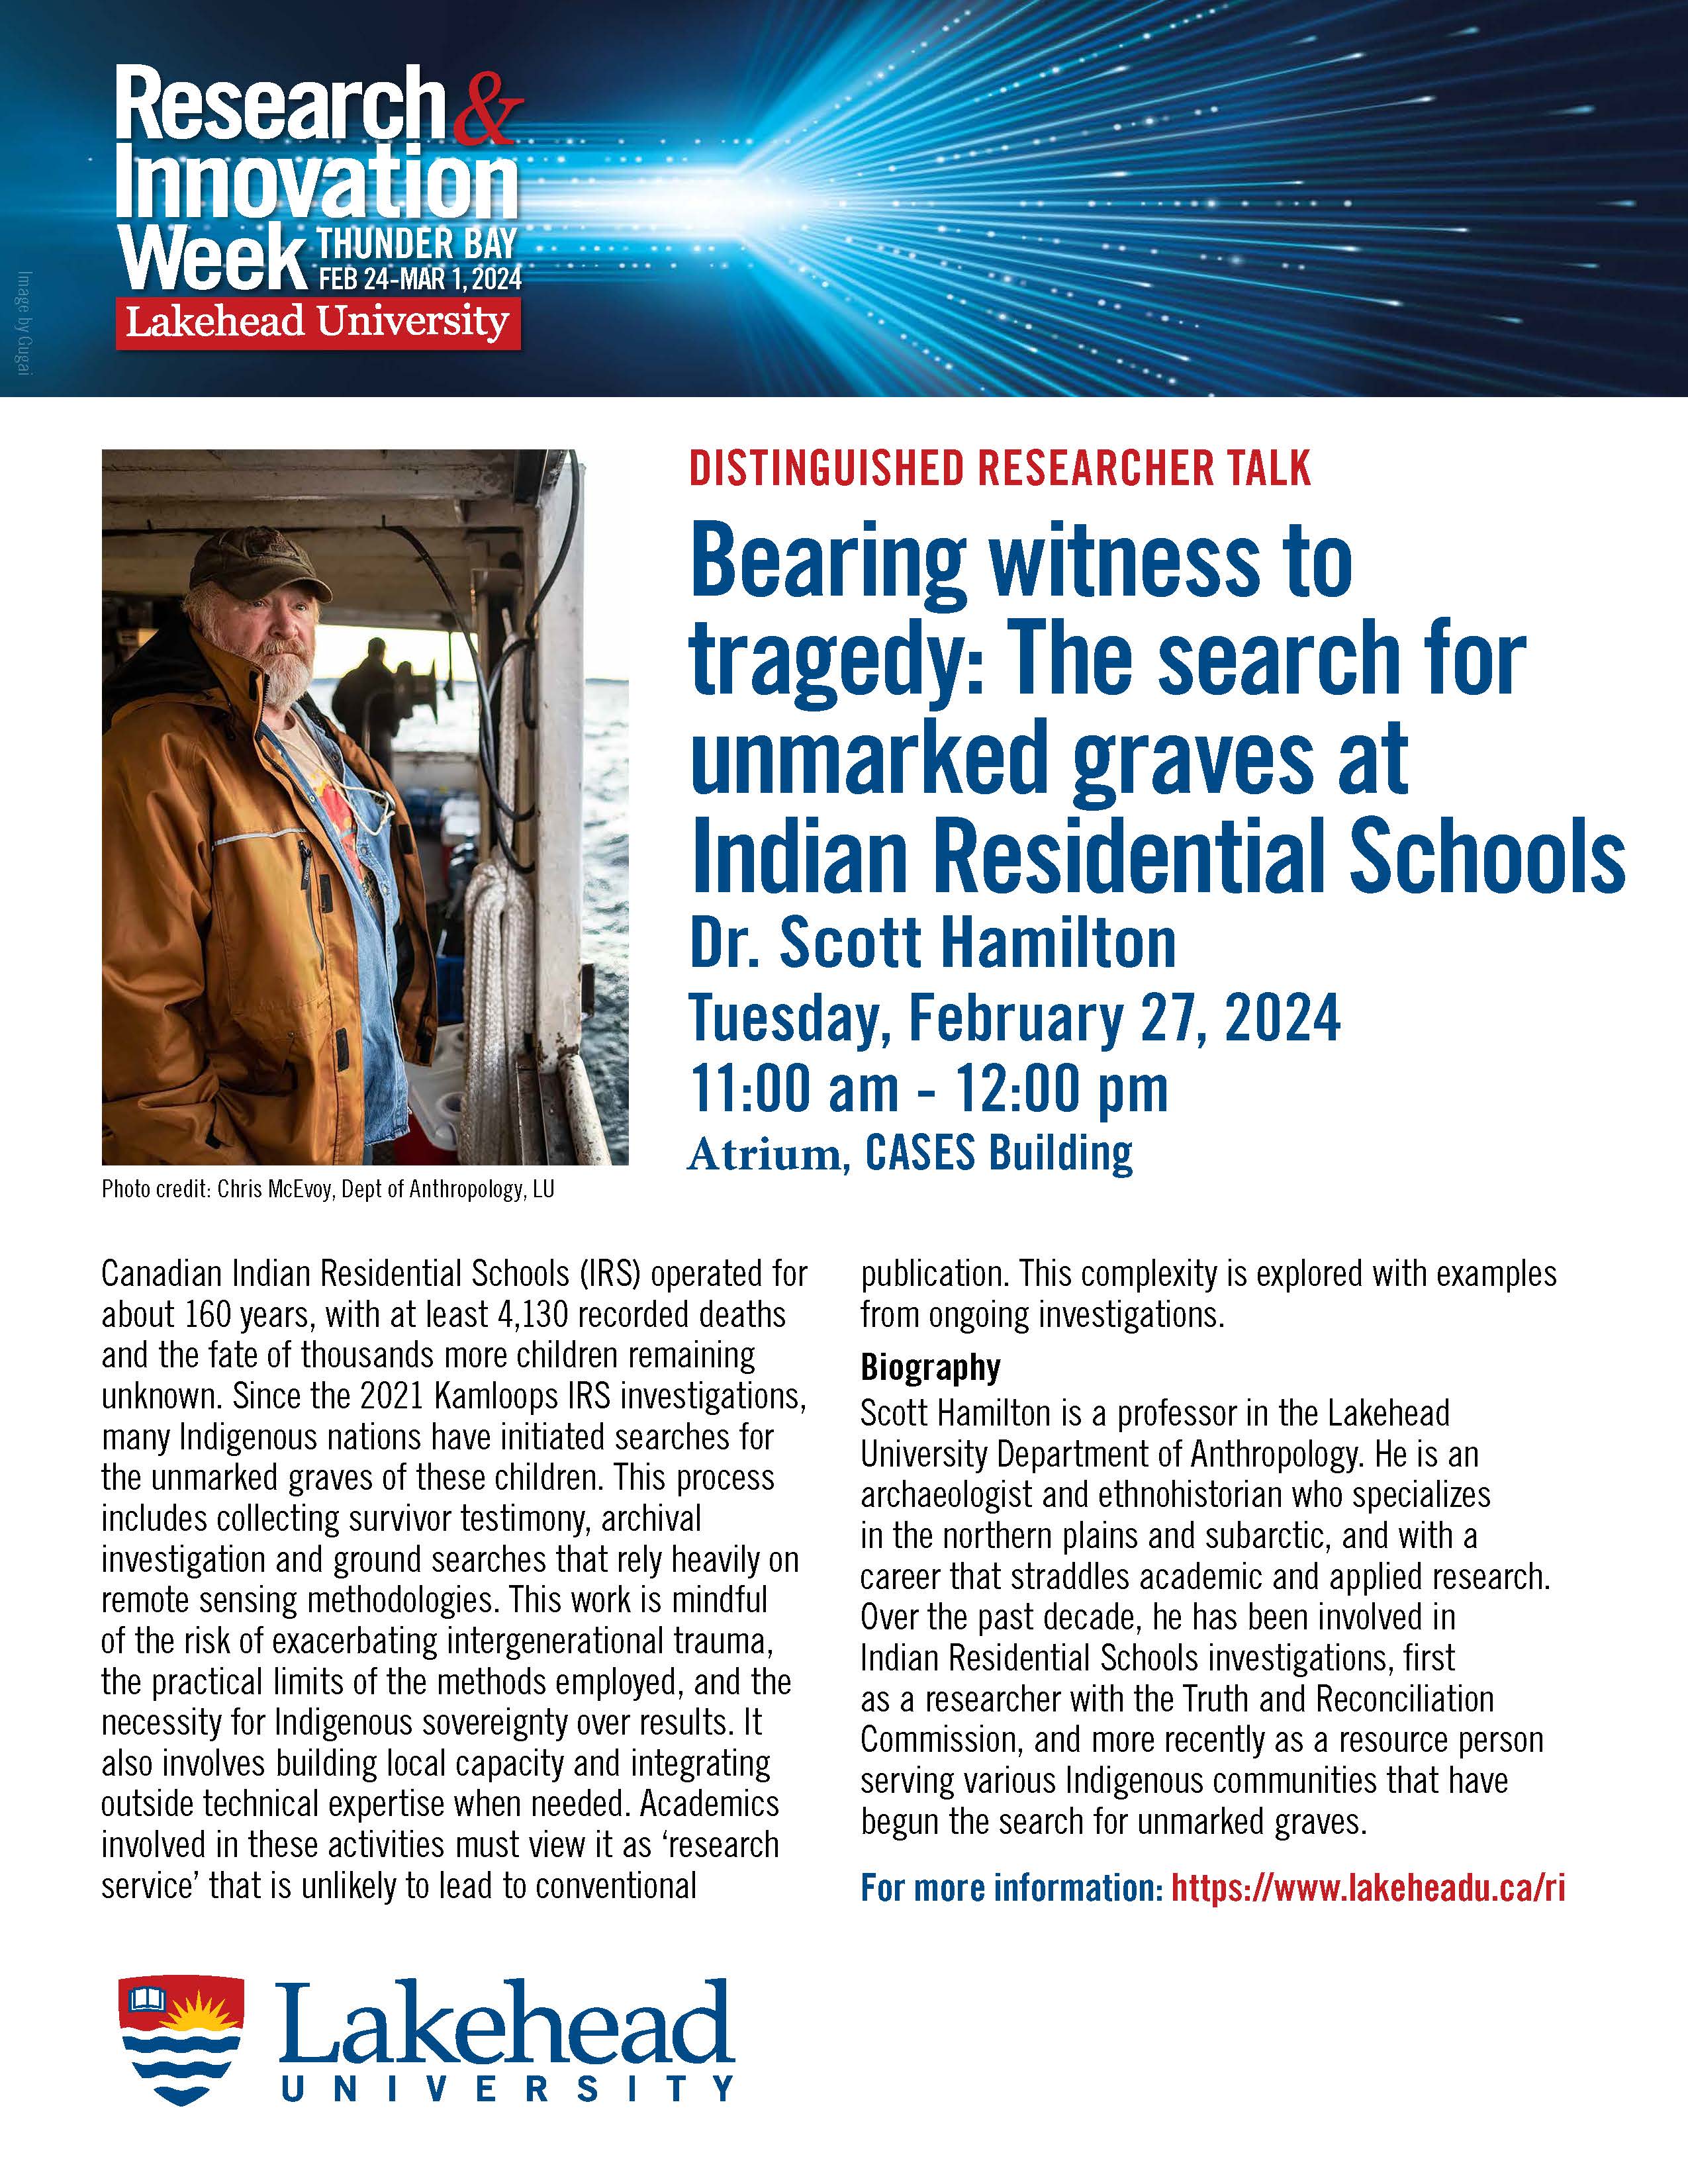 Event Poster: Dr. Scott Hamilton -Distinguished Researcher Talk "Bearing witness to tragedy: The search for unmarked graves at Indian Residential Schools"